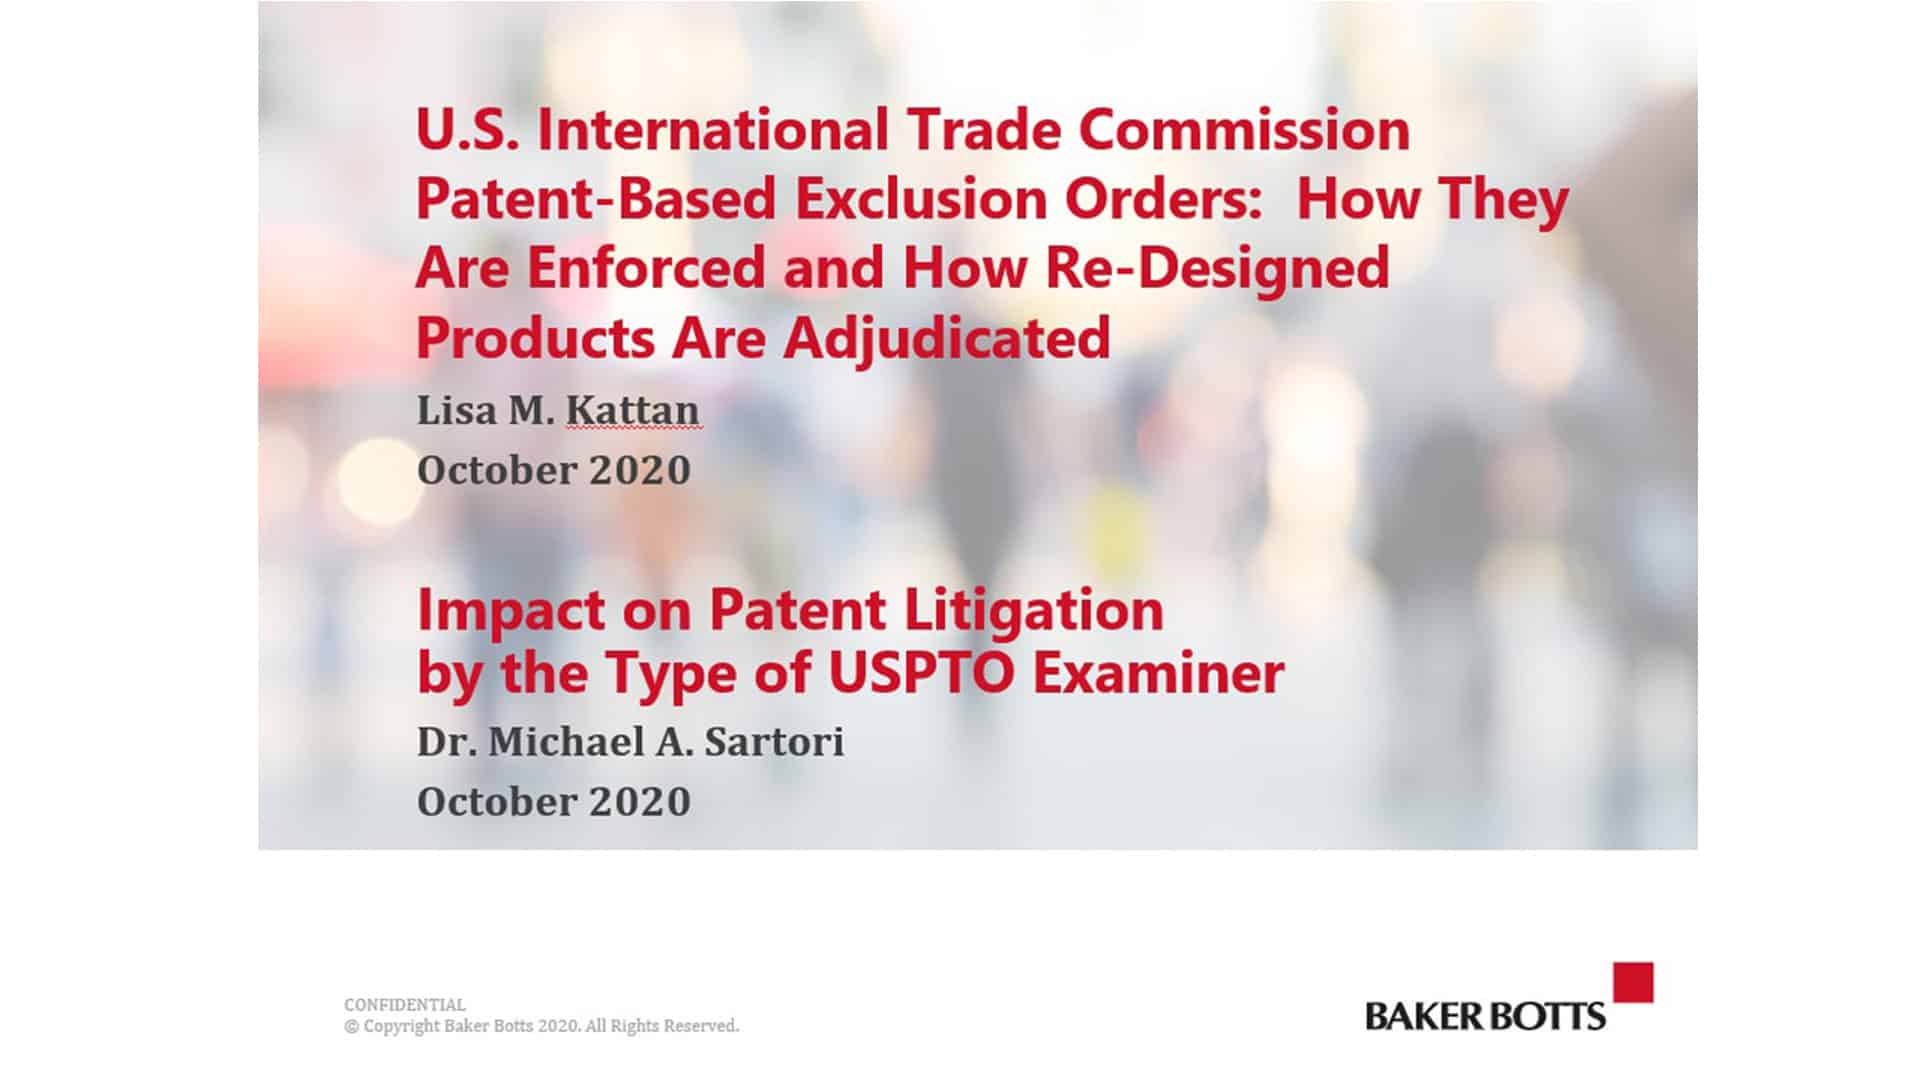 [Webinar materials available for download] US patent-related seminars by US intellectual property experts